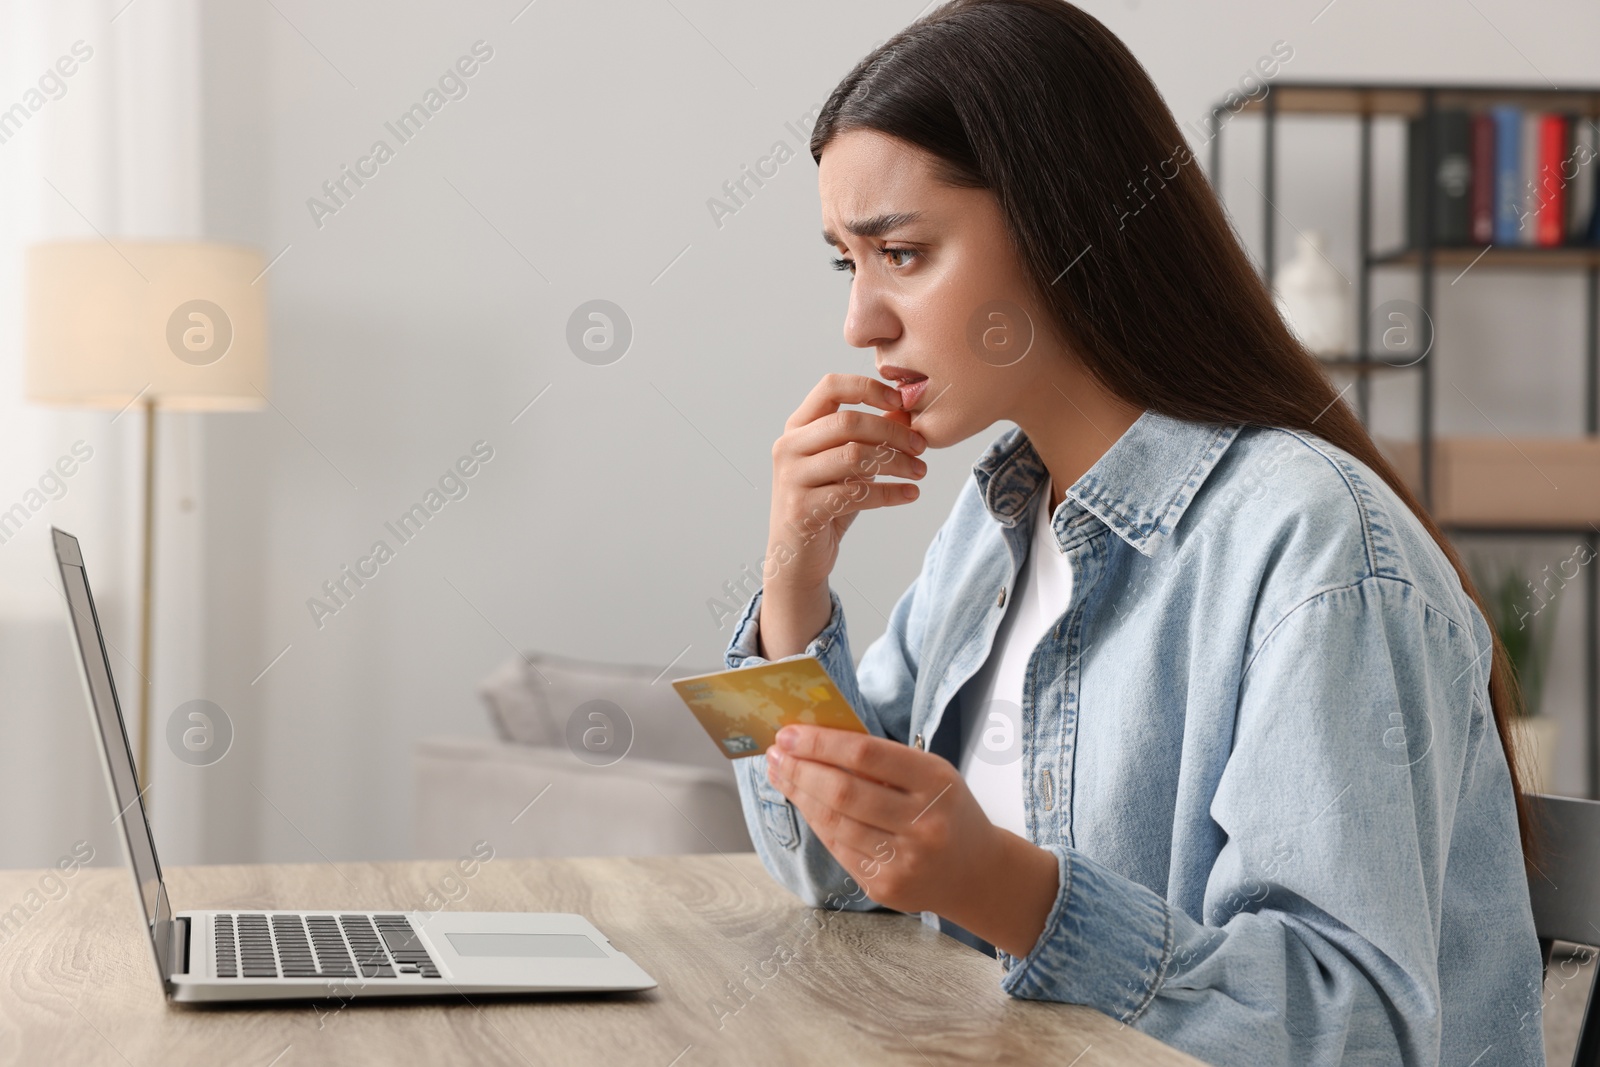 Photo of Stressed woman with credit card using laptop at table indoors. Be careful - fraud